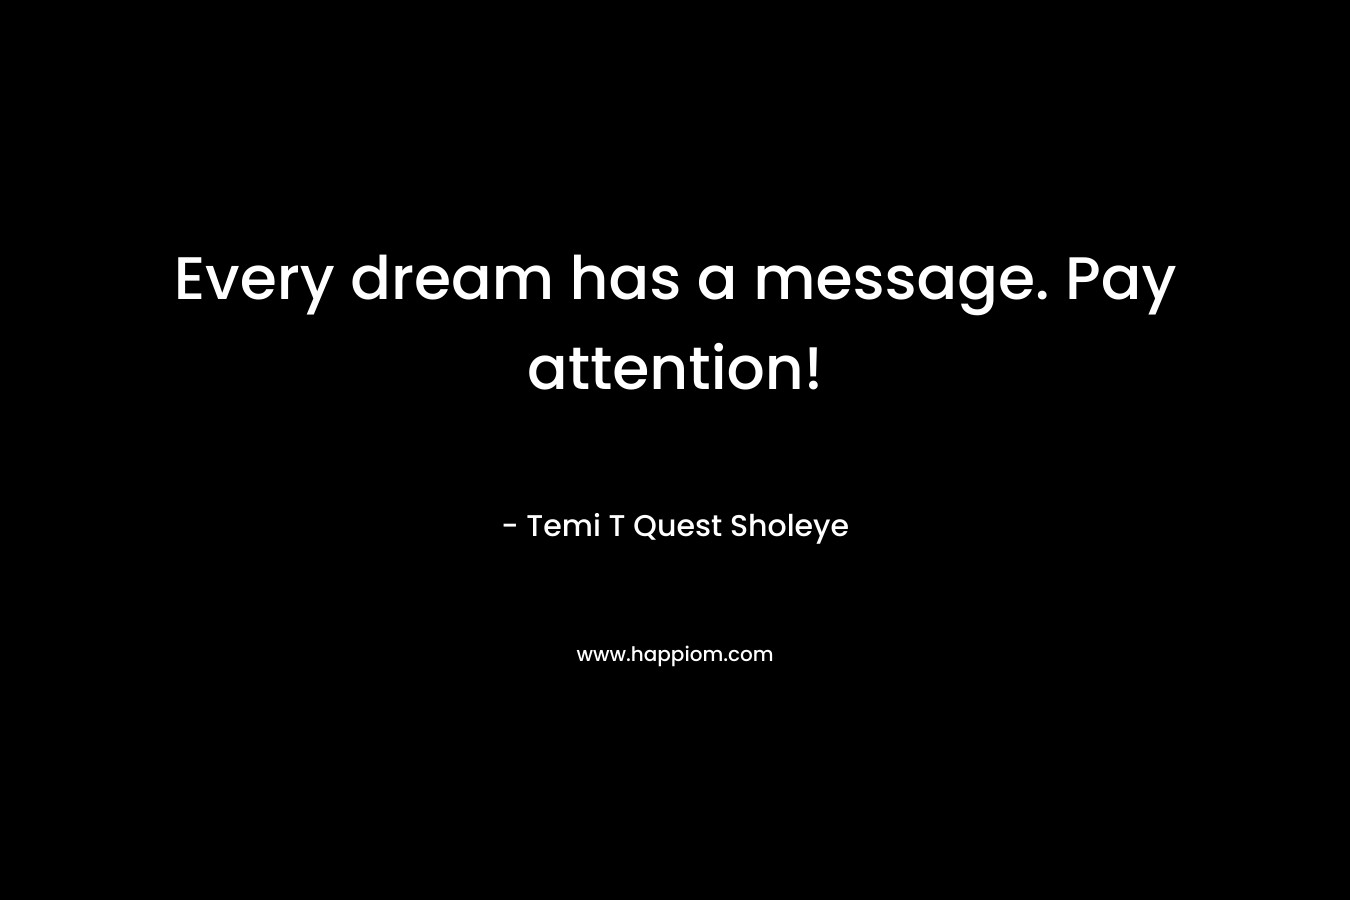 Every dream has a message. Pay attention!